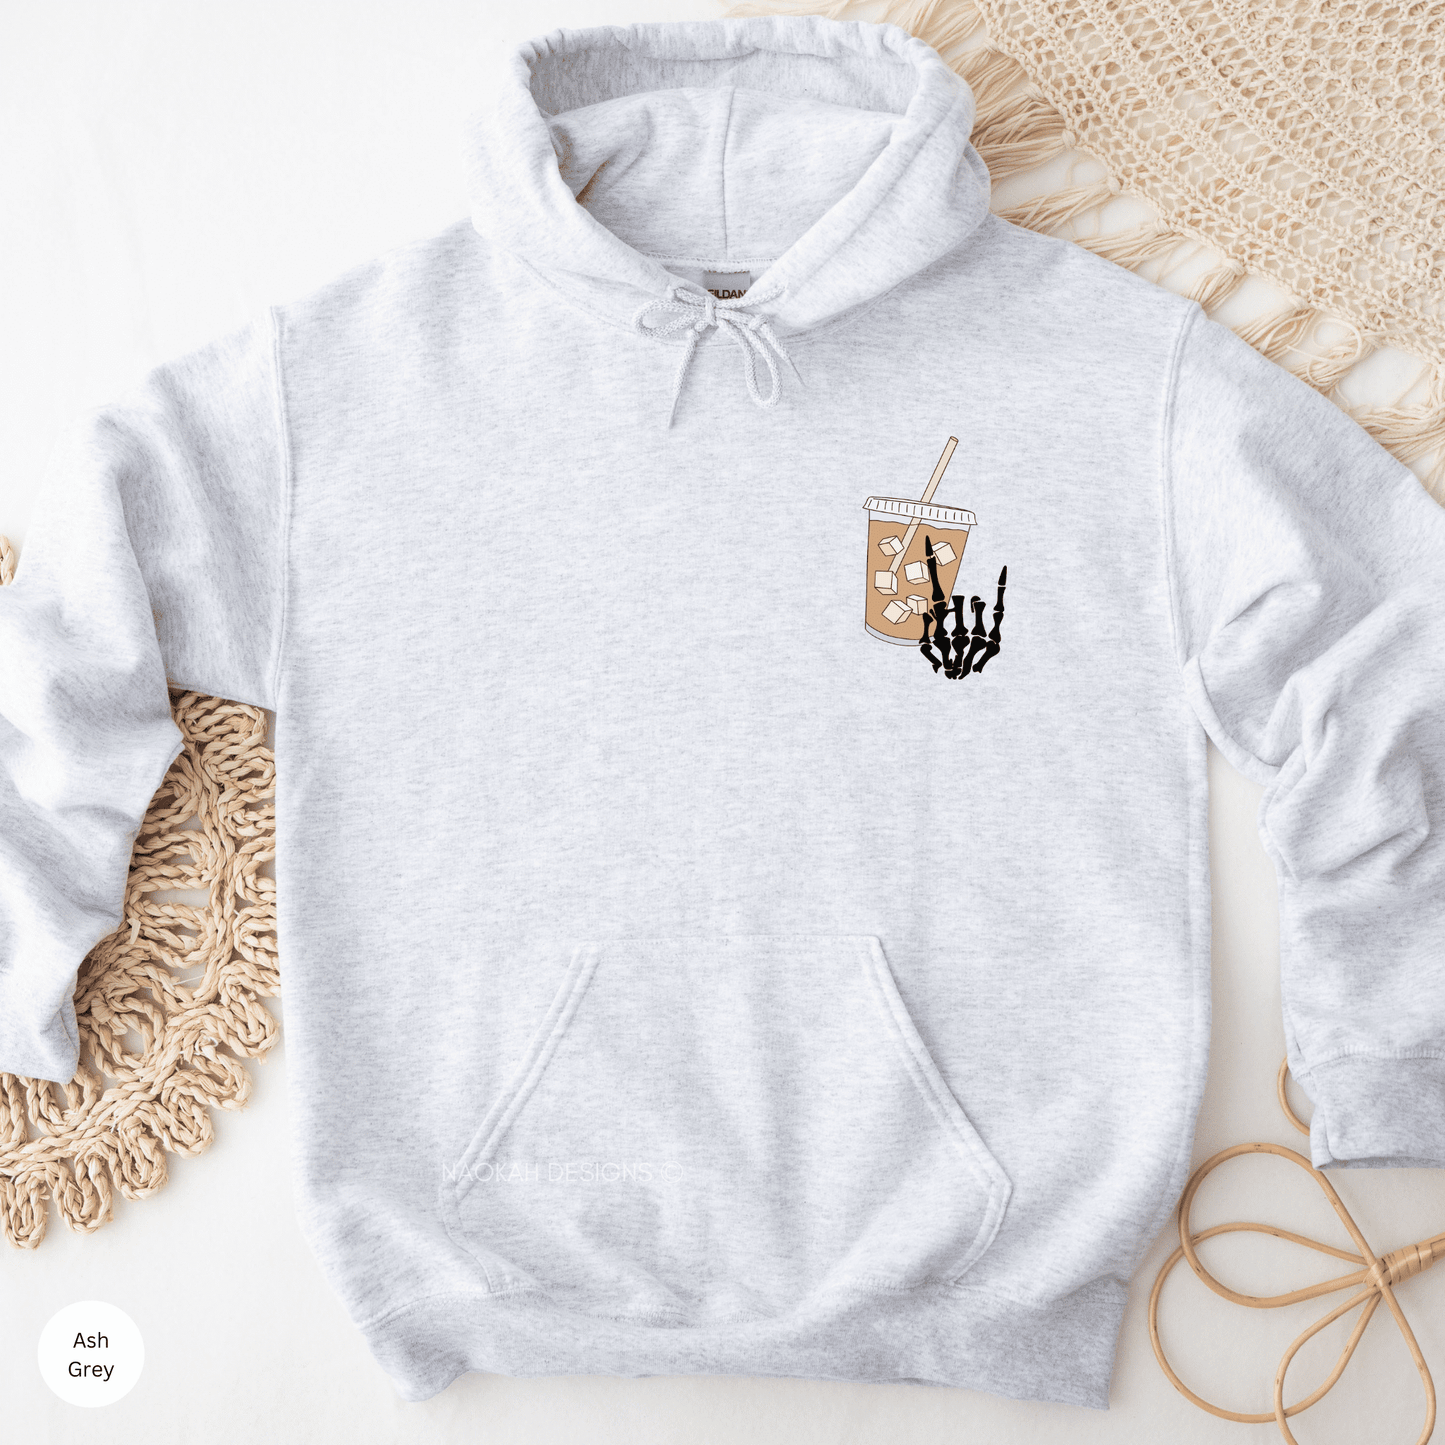 Stay fueled and stylish with our new 'Fueled by Iced Coffee and Anxiety' Sweatshirt. With a skeleton hand and an iced coffee on the front and the phrase 'fueled by iced coffee and anxiety' on the back, you'll never have to worry about running low on fuel or style. Stay energized, cool, and confident in our high-quality sweatshirt!